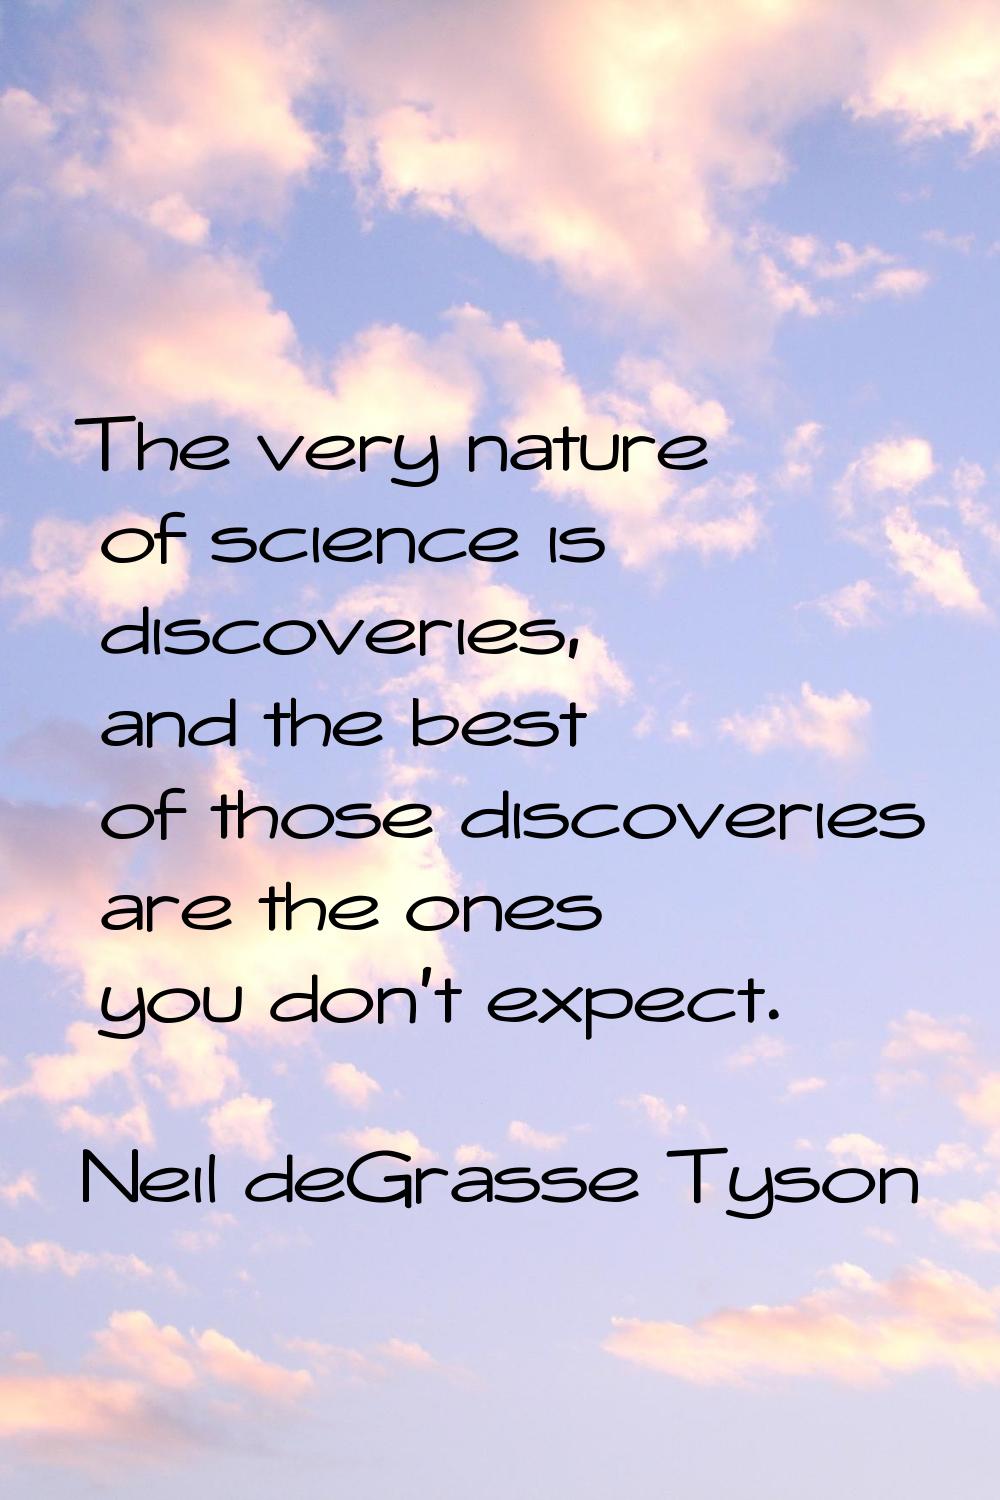 The very nature of science is discoveries, and the best of those discoveries are the ones you don't